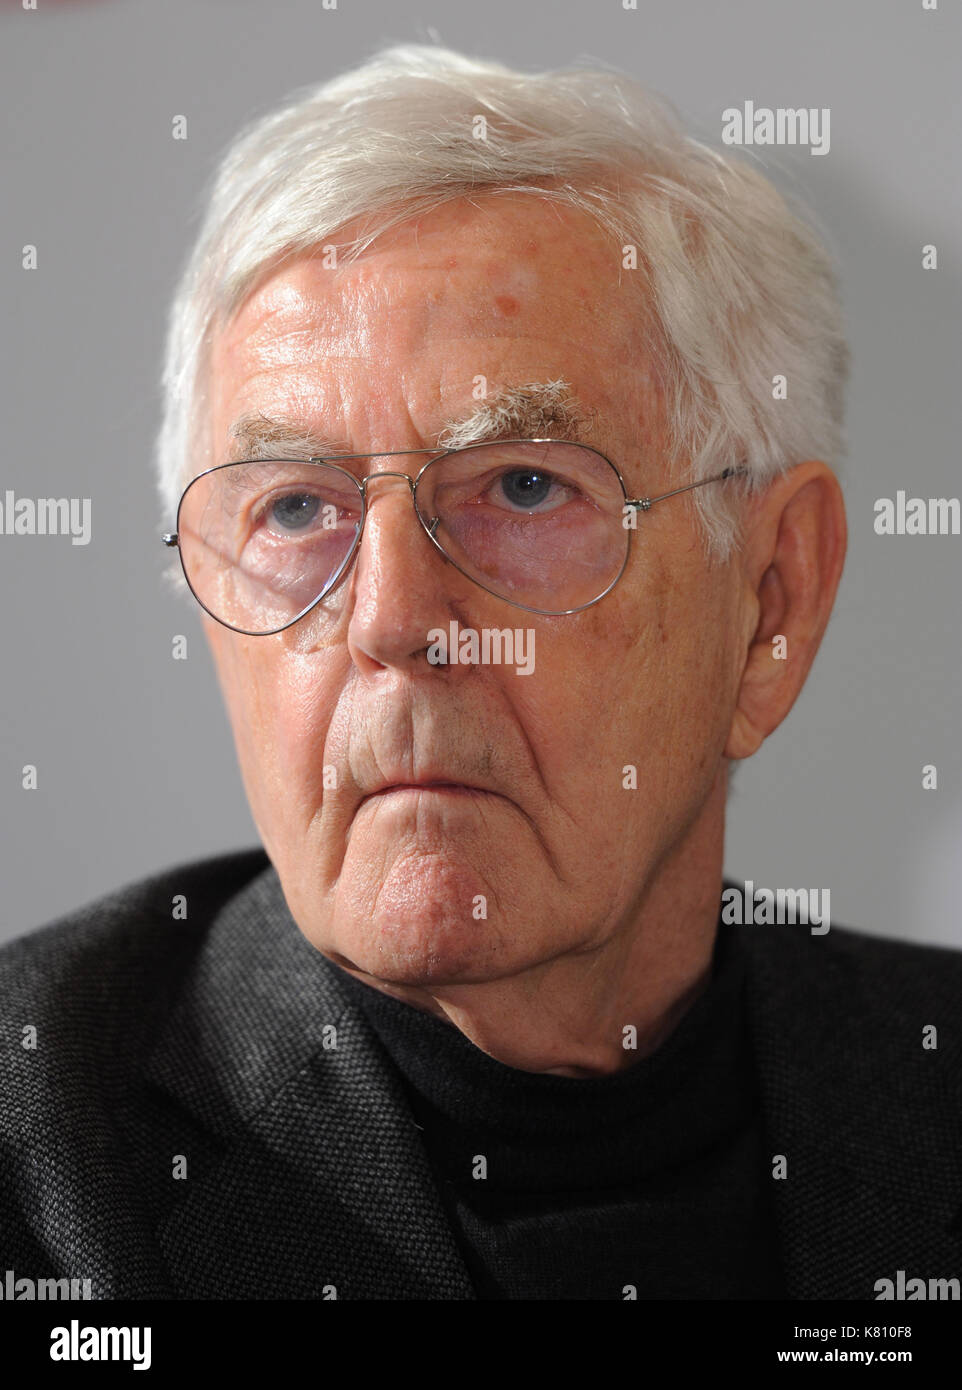 Frankfurt Main, Germany. 15th Nov, 2012. Architect and urban planner Albert Speer, Jr. sits during a press conference for the international highrise award in Frankfurt Main, Germany, 15 November 2012. His father Albert Speer was Hitler's architect and a major figure of the Third Reich. Photo: Arne Dedert | usage worldwide/dpa/Alamy Live News Stock Photo